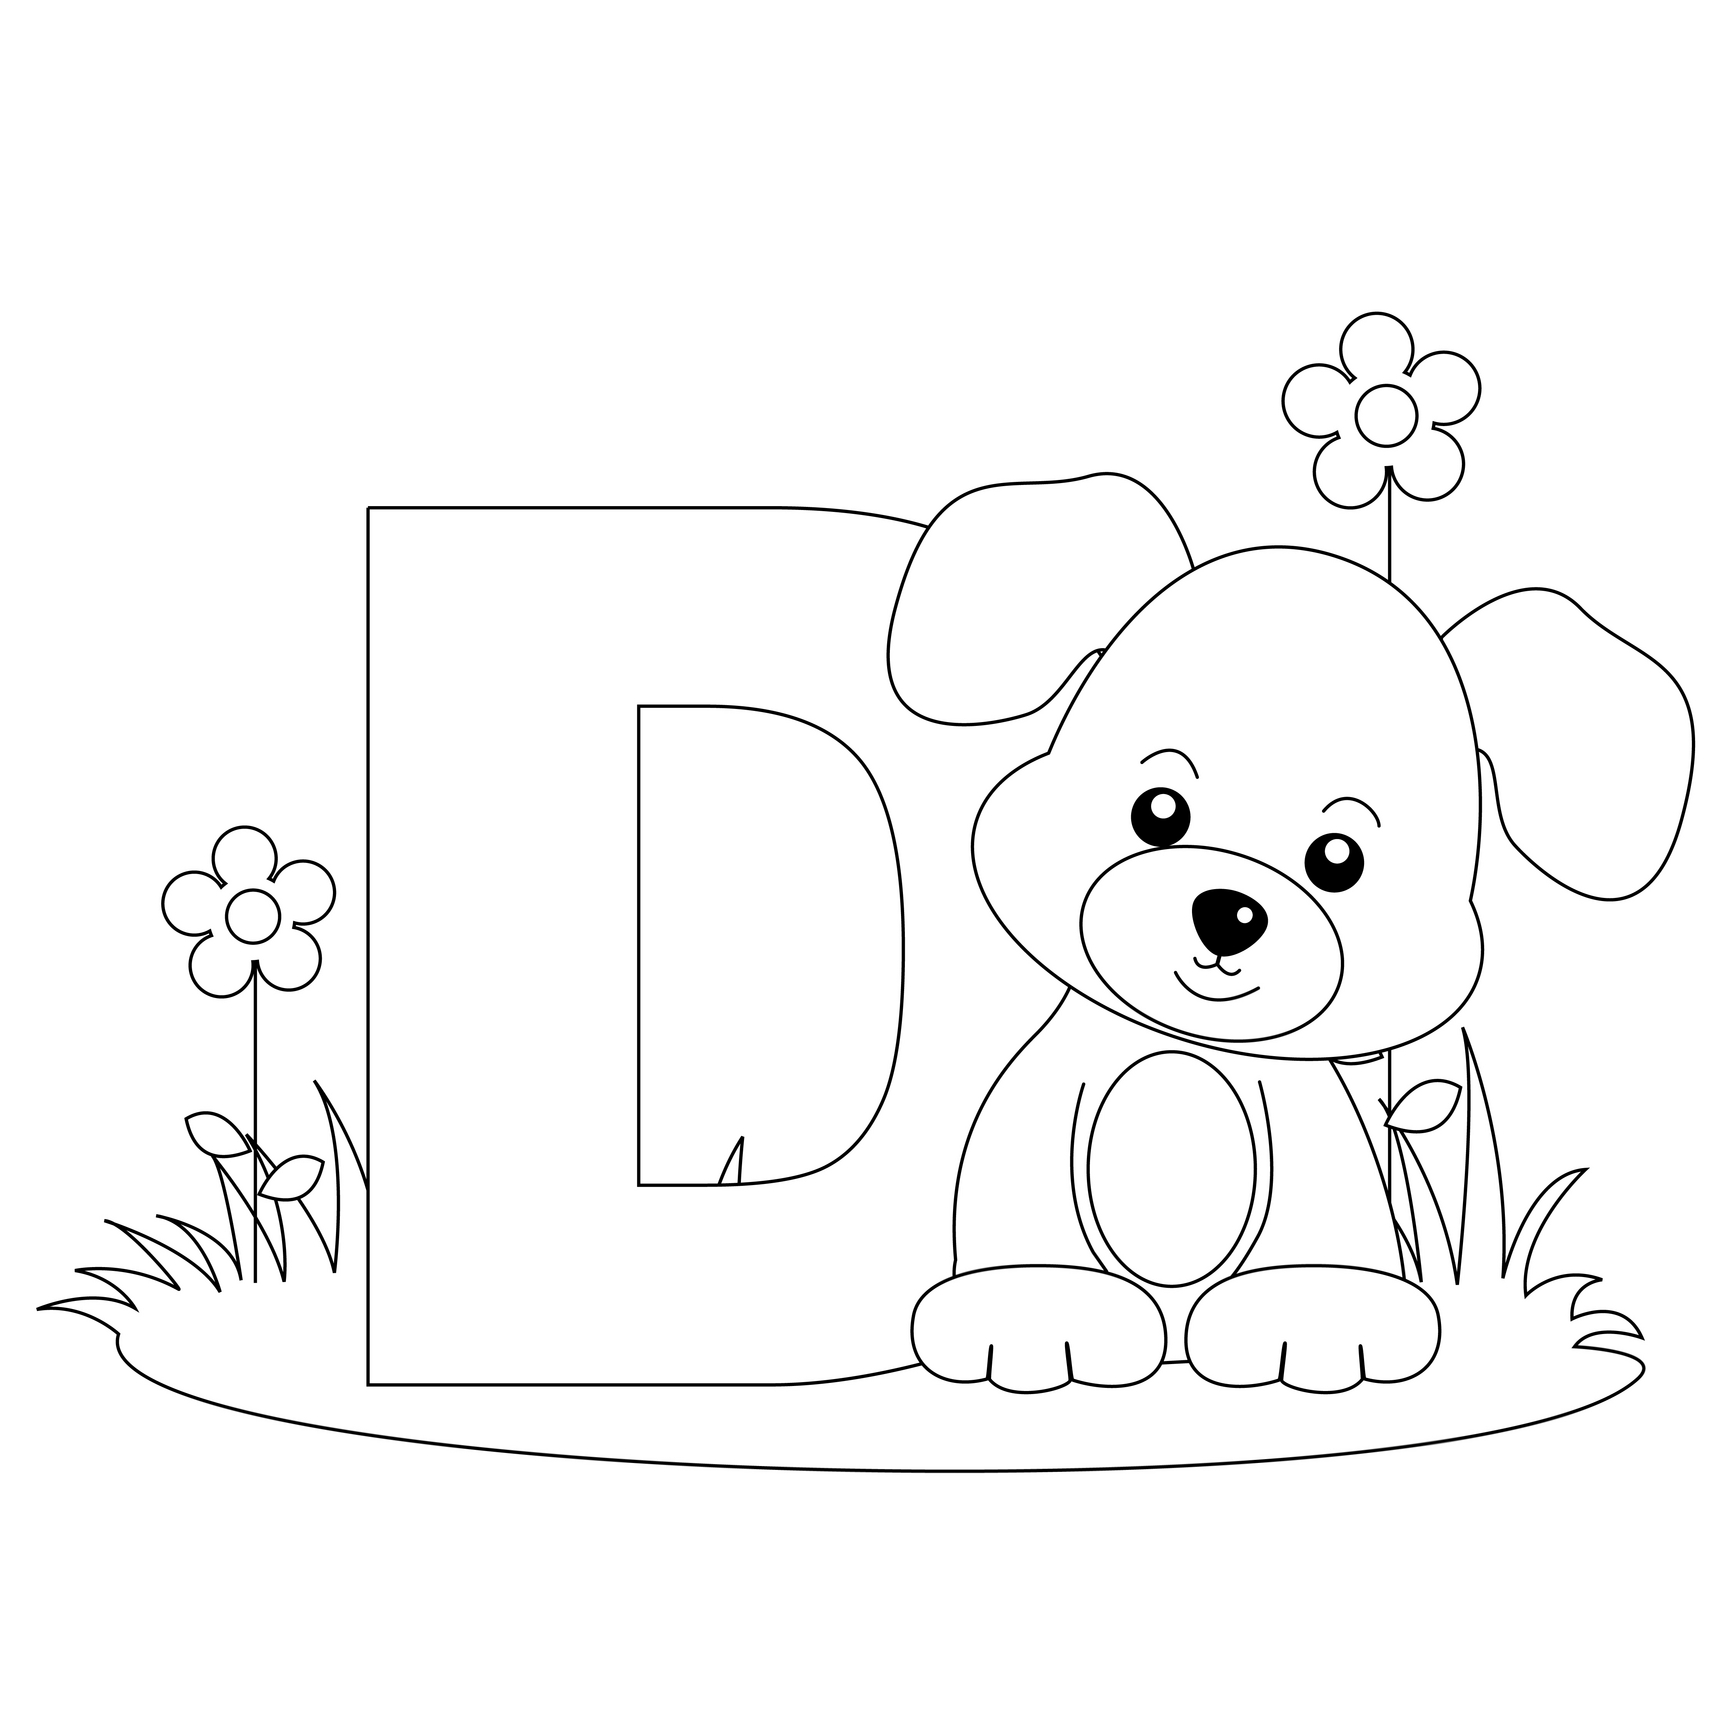 Drawing Alphabet 125092 Educational Printable Coloring Pages